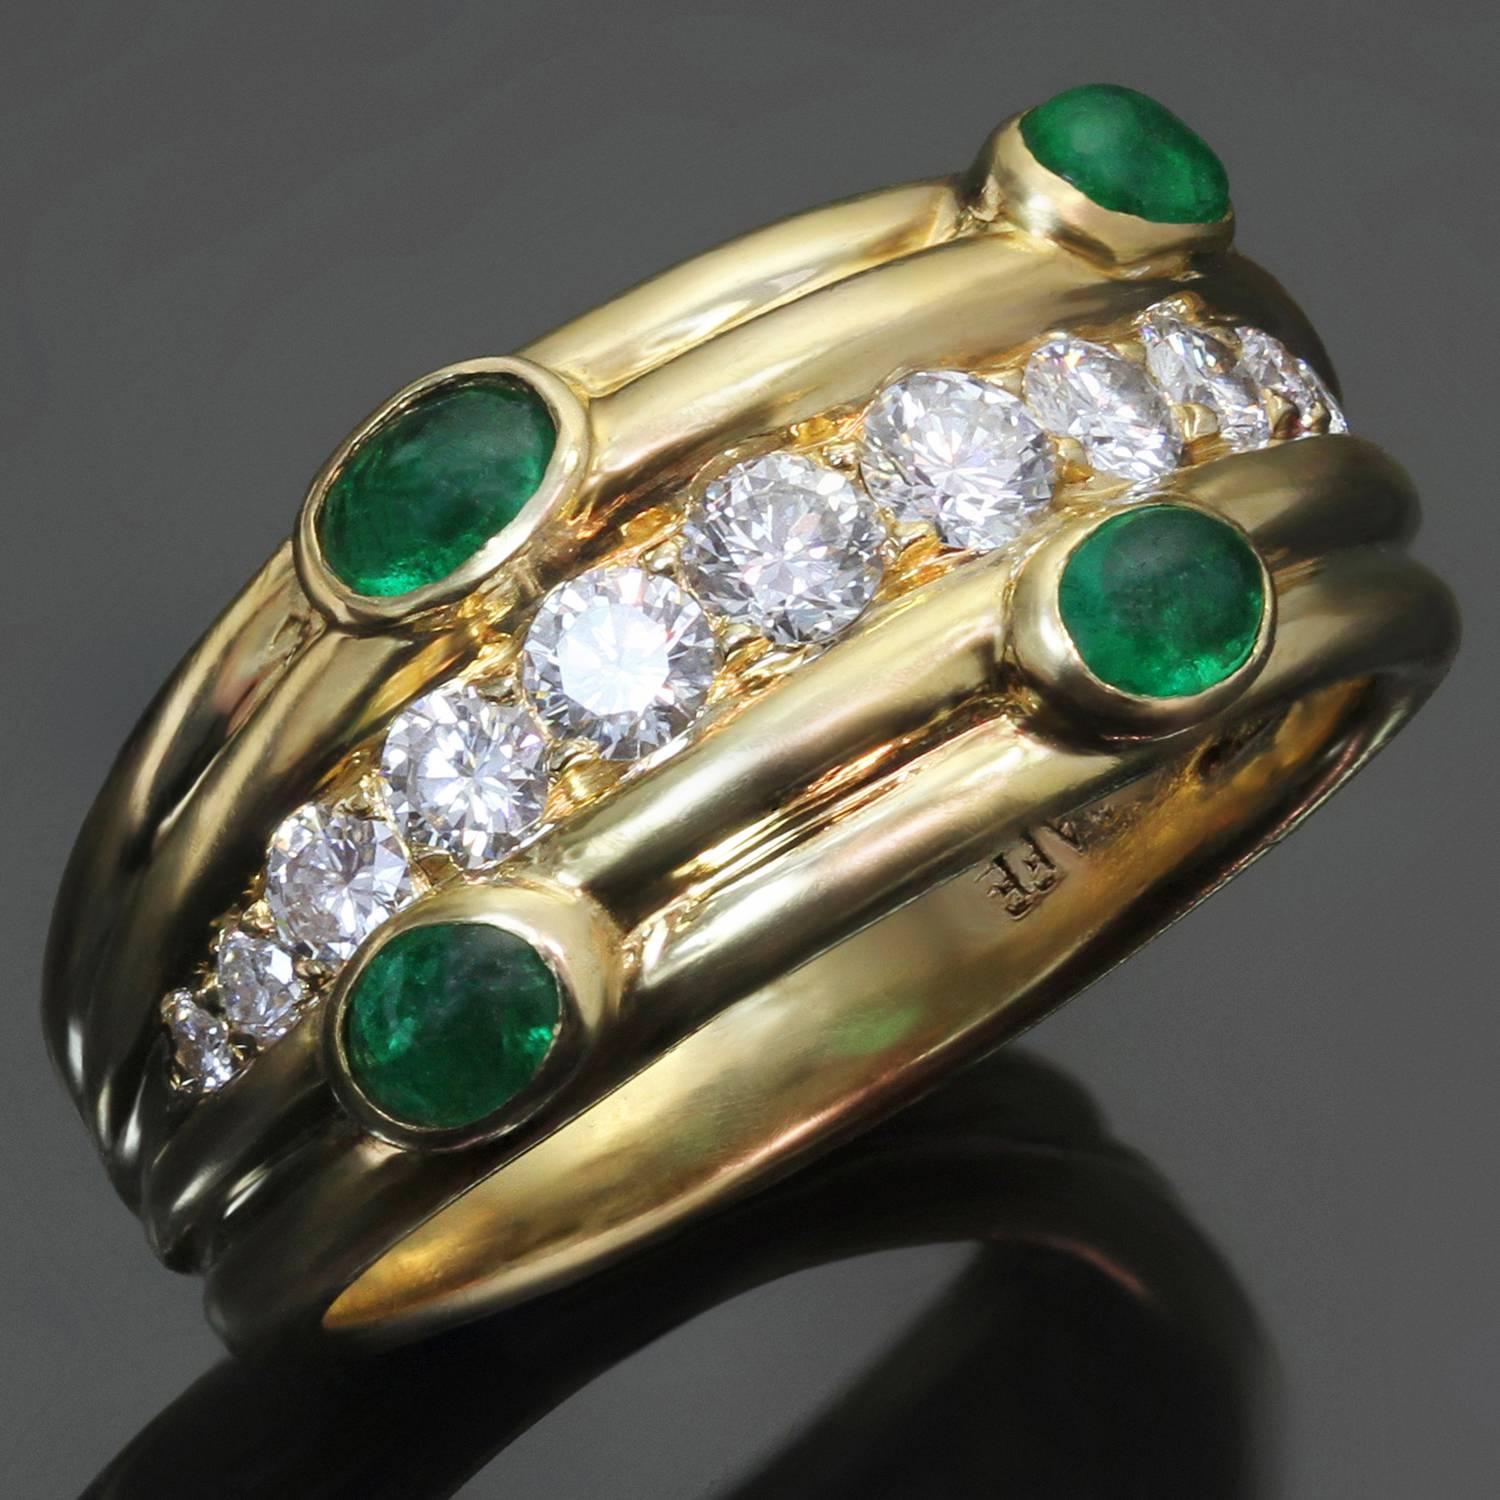 This fabulous vintage Graff ring is crafted in 18k yellow gold and set with 4 sugarloaf cabochon emerald stones of an estimated 0.50 carats and sparkling diamonds of an estimated 0.50 carats. Made in United Kingdom circa 1980s. Measurements: